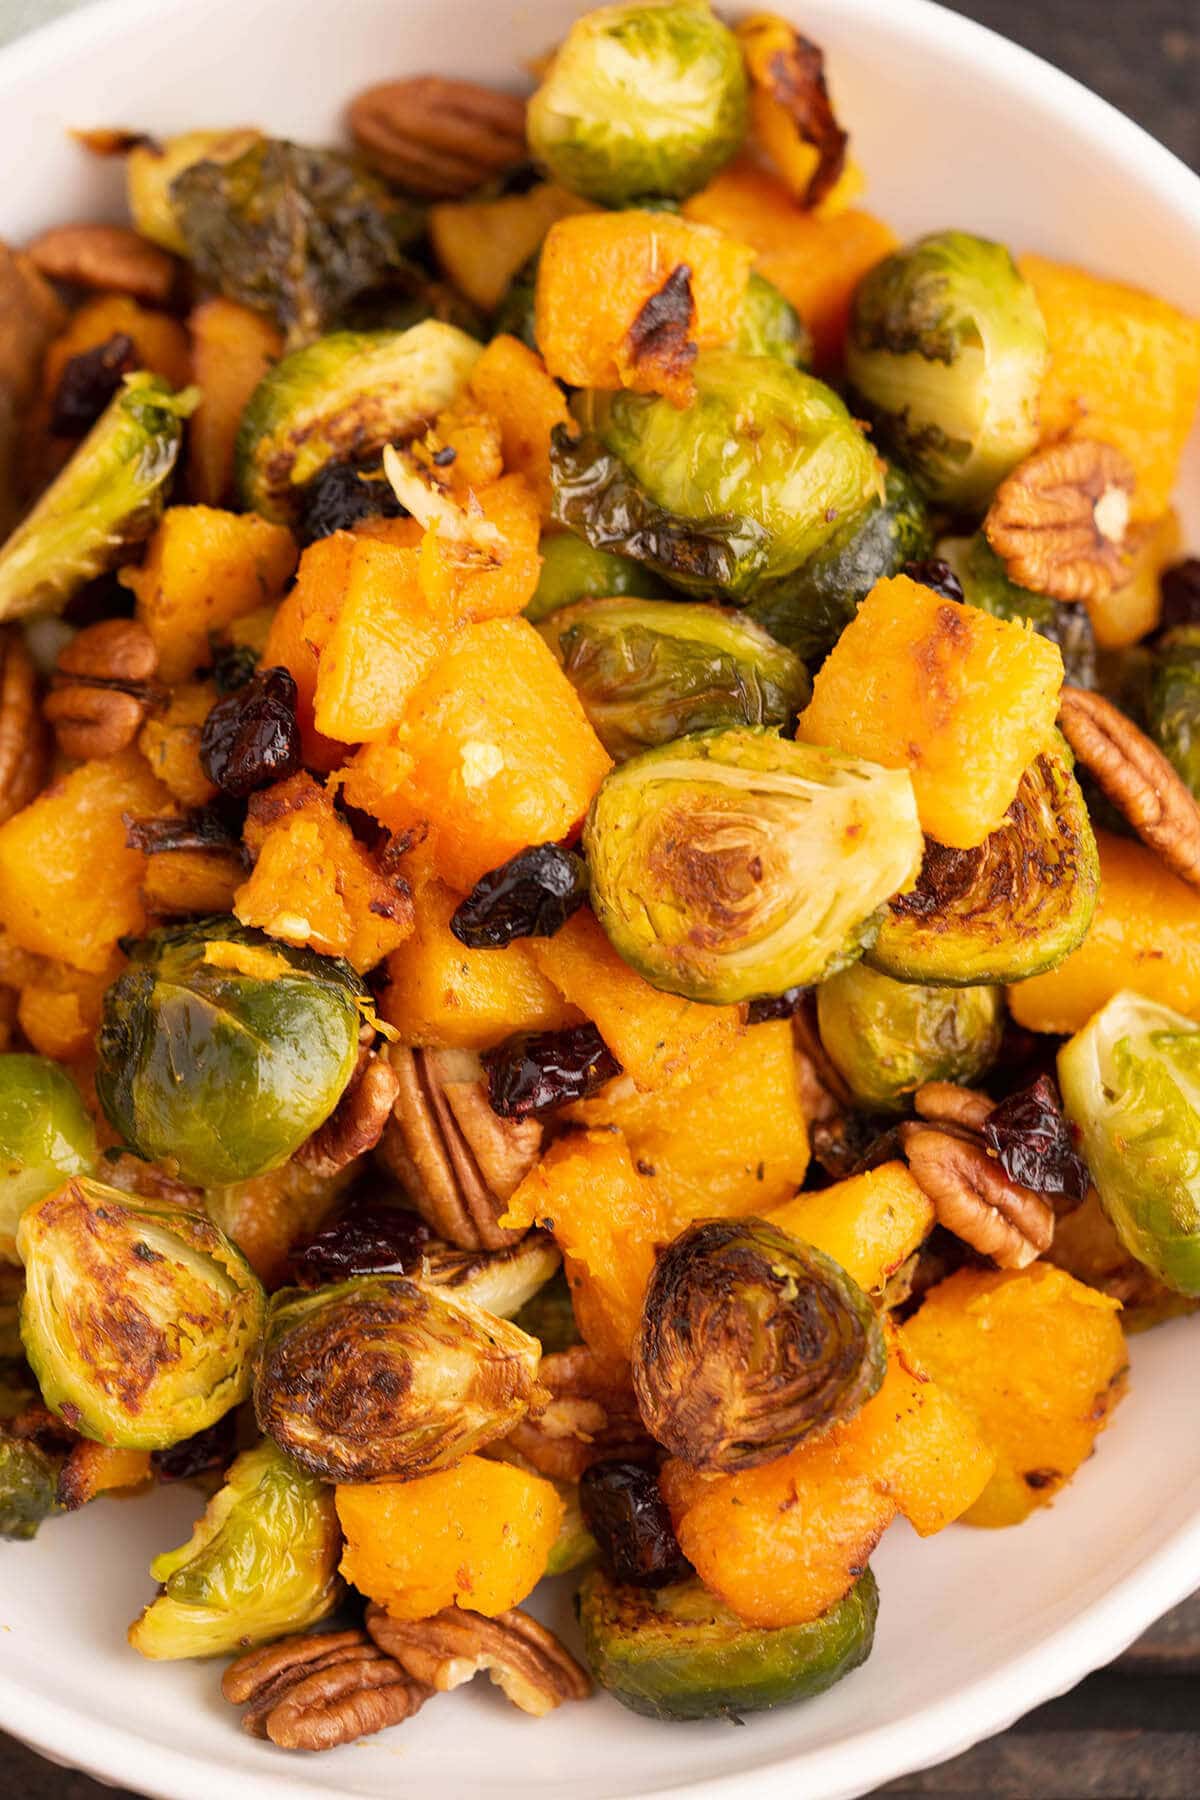 Overhead photo of roasted butternut squash and Brussels sprouts.